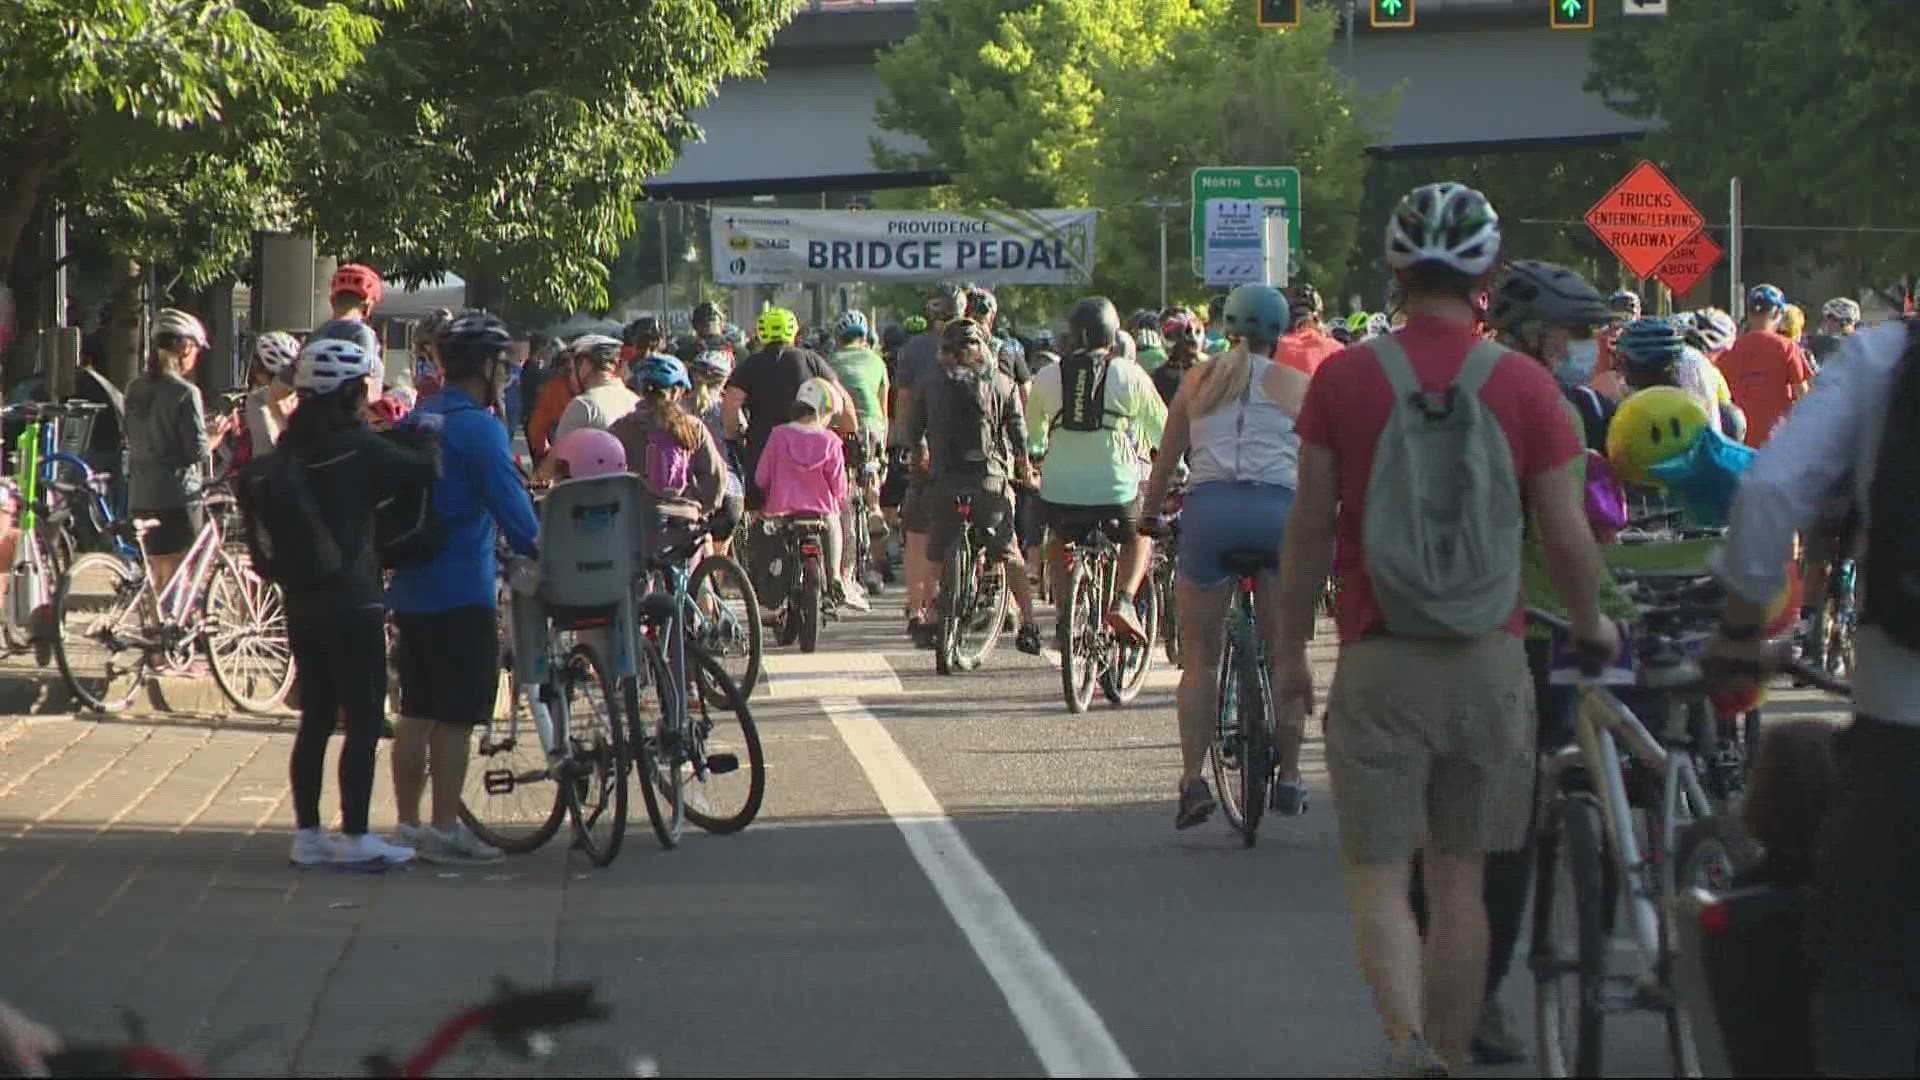 Thousands of people enjoyed the annual Providence Bridge Pedal, riding bicycles over bridges that are usually closed for cars.